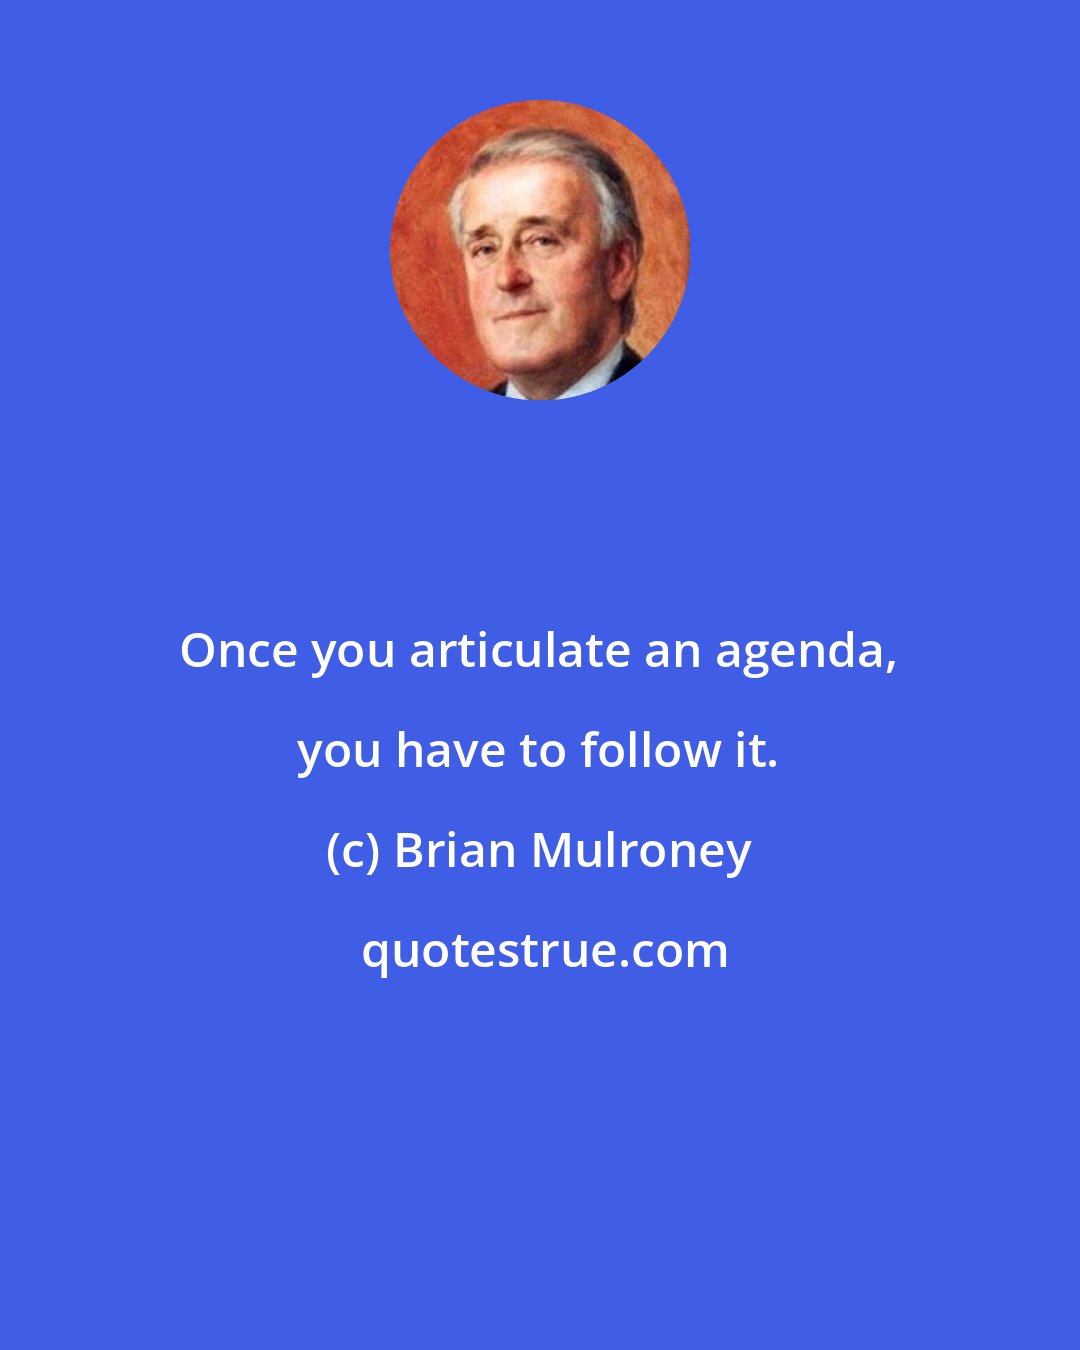 Brian Mulroney: Once you articulate an agenda, you have to follow it.